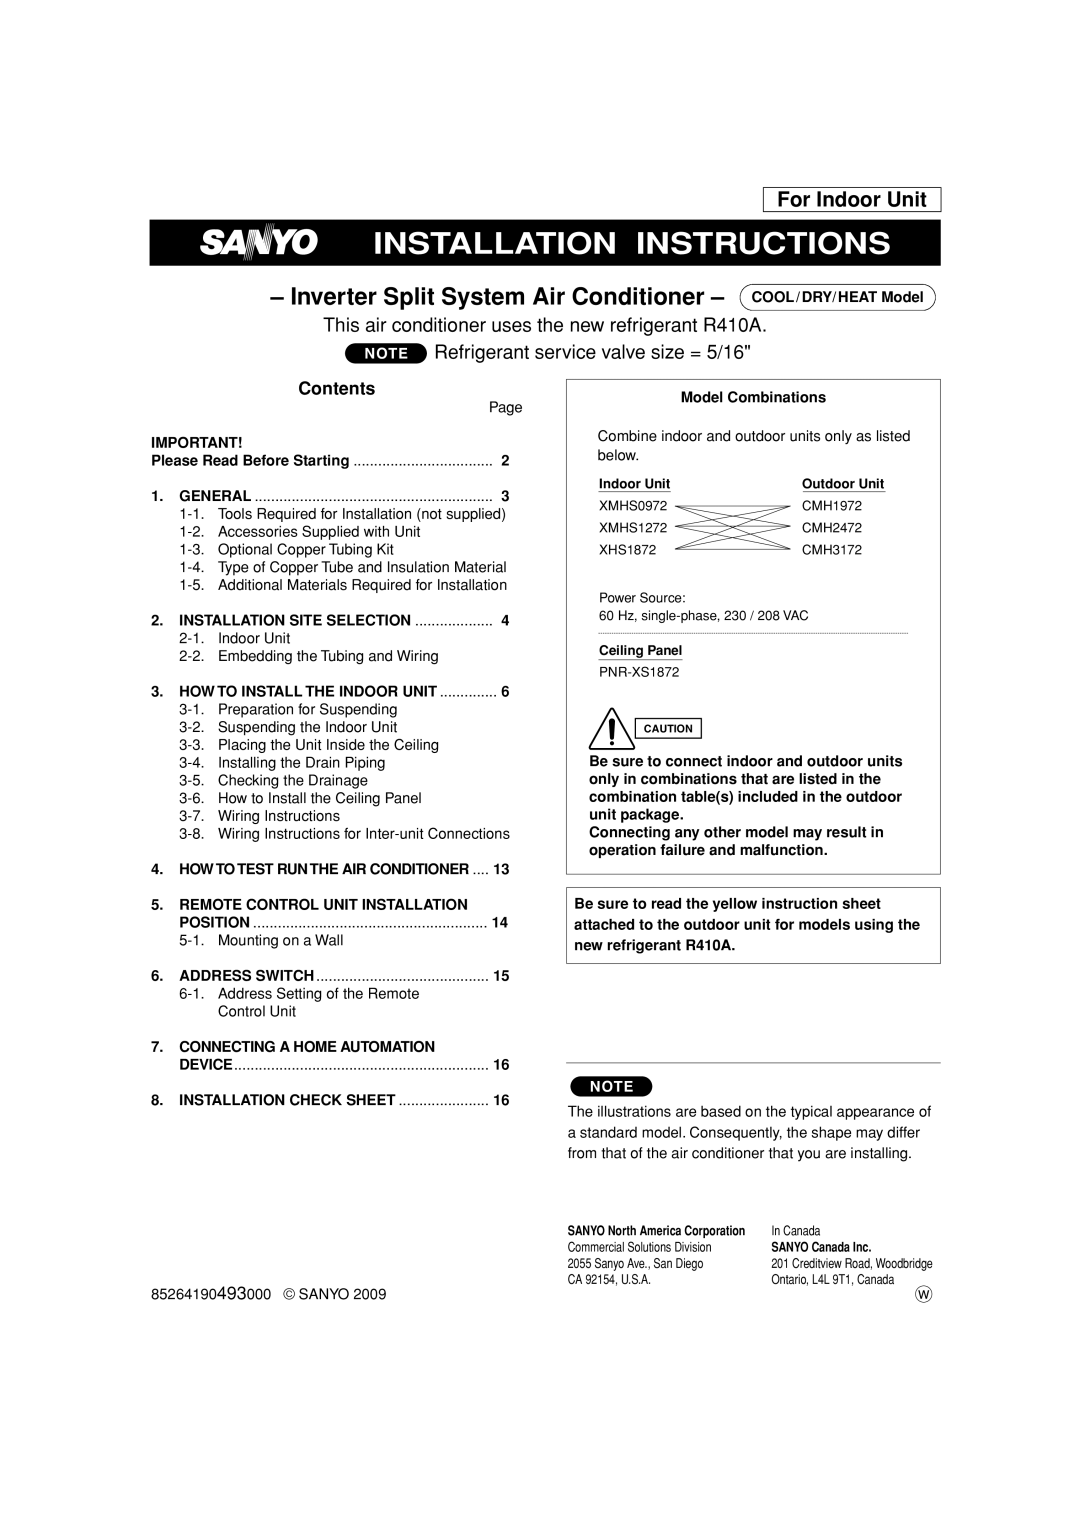 Sanyo XMHS0972, XMHS1272 Installation Instructions, For Indoor Unit, NOTE Refrigerant service valve size = 5/16, Contents 